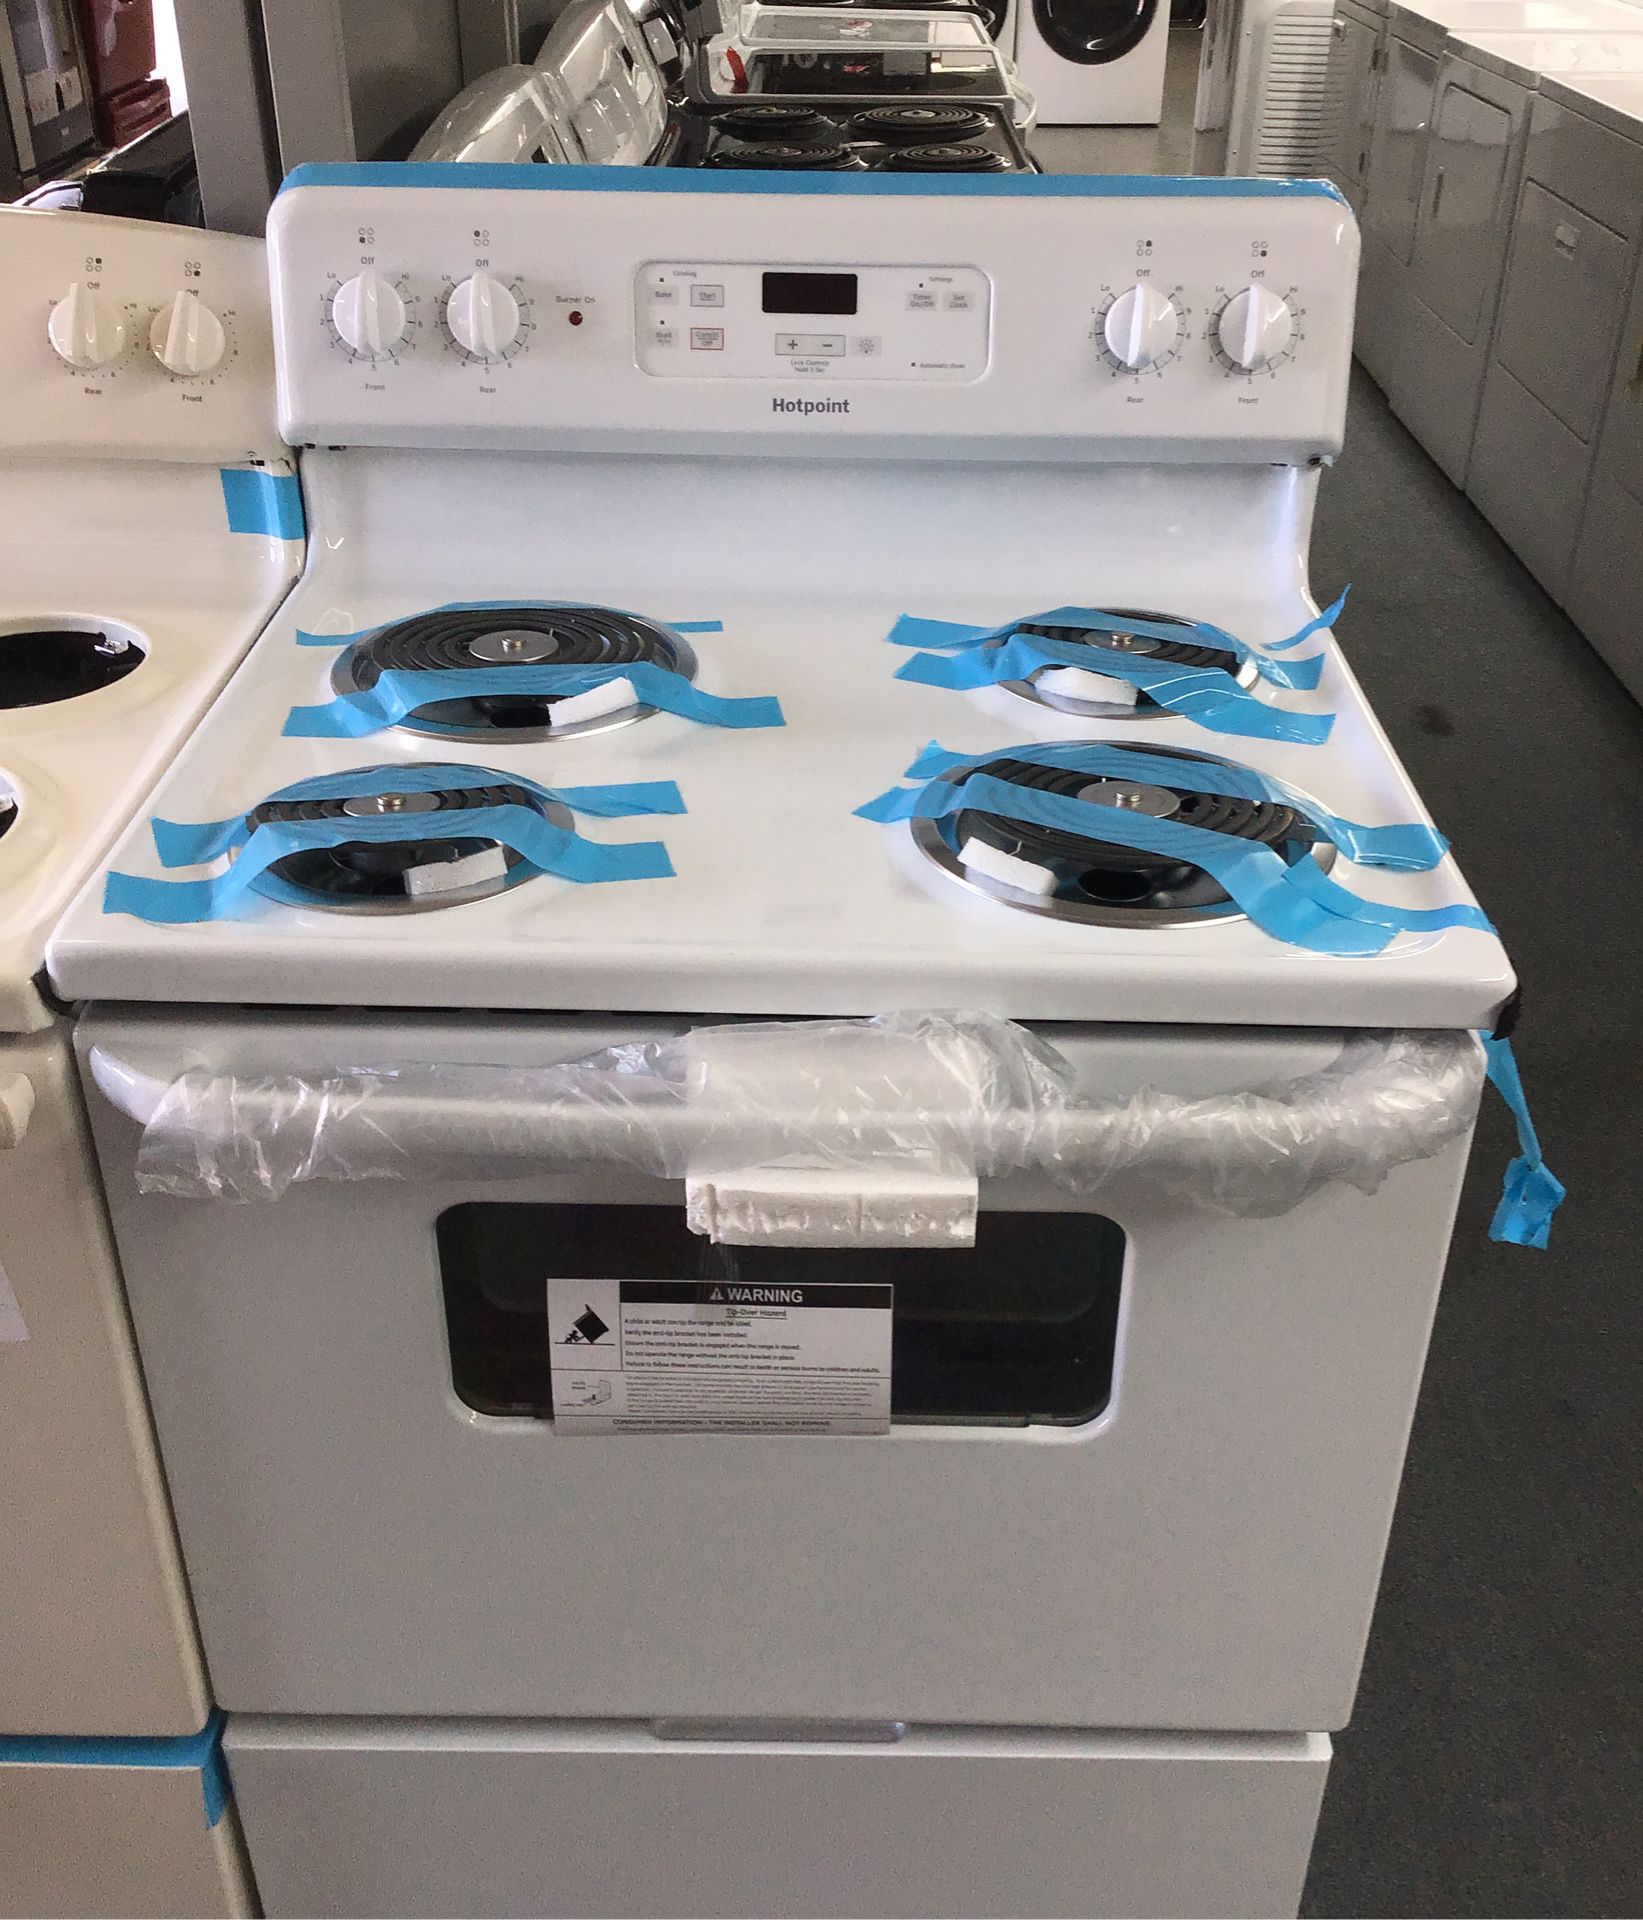 New scratch and dent Hotpoint coil top range. 1 year warranty